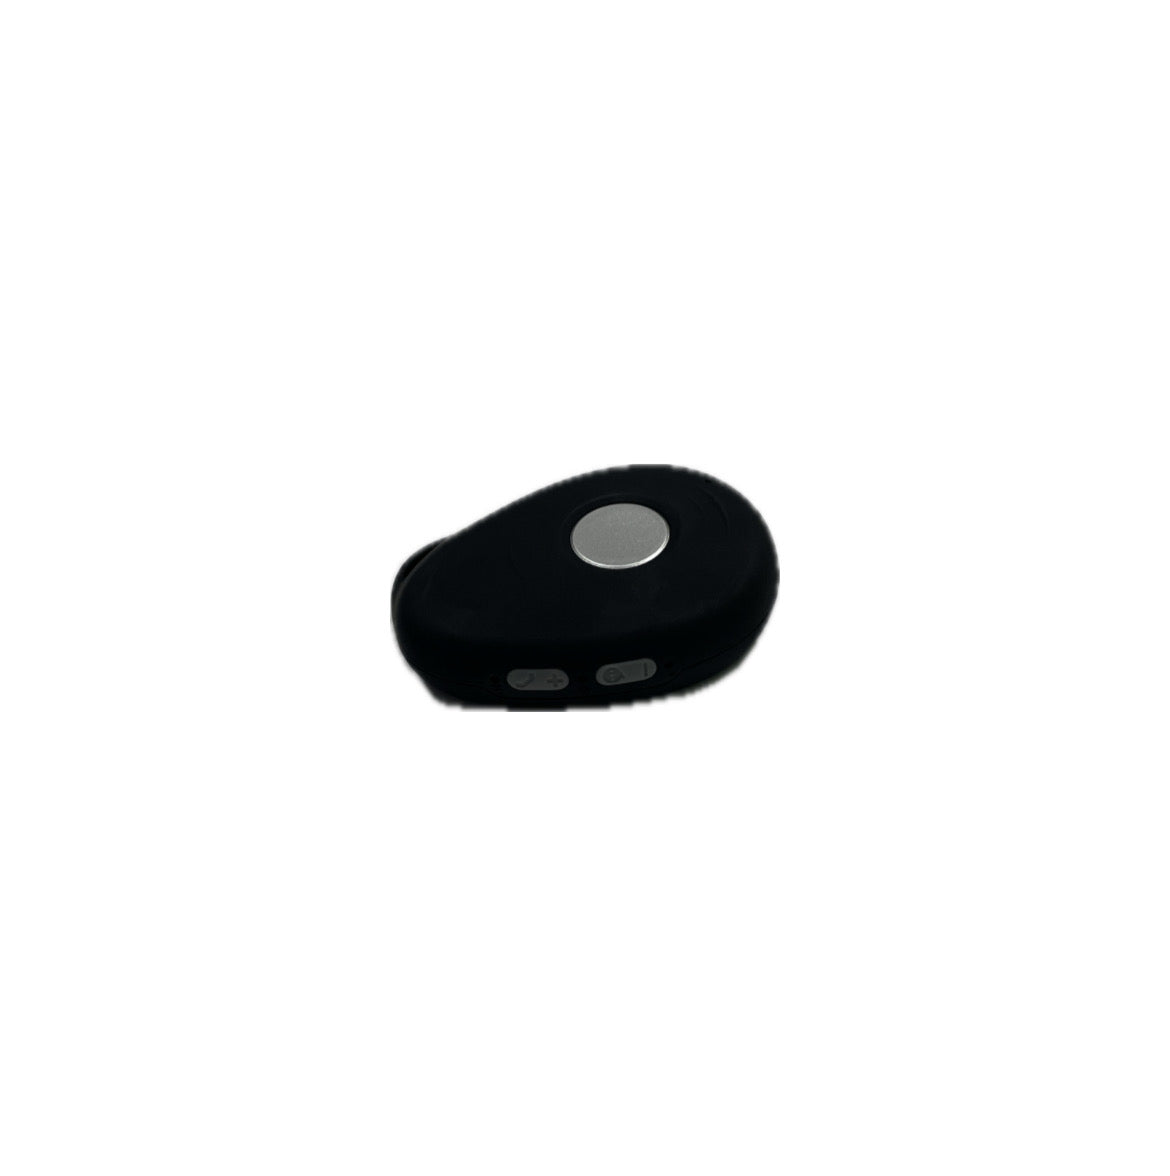 Keychain GPS Tracker-Know the Exact Location Live. For Kids/Elderly/The Disabled. No Monthly